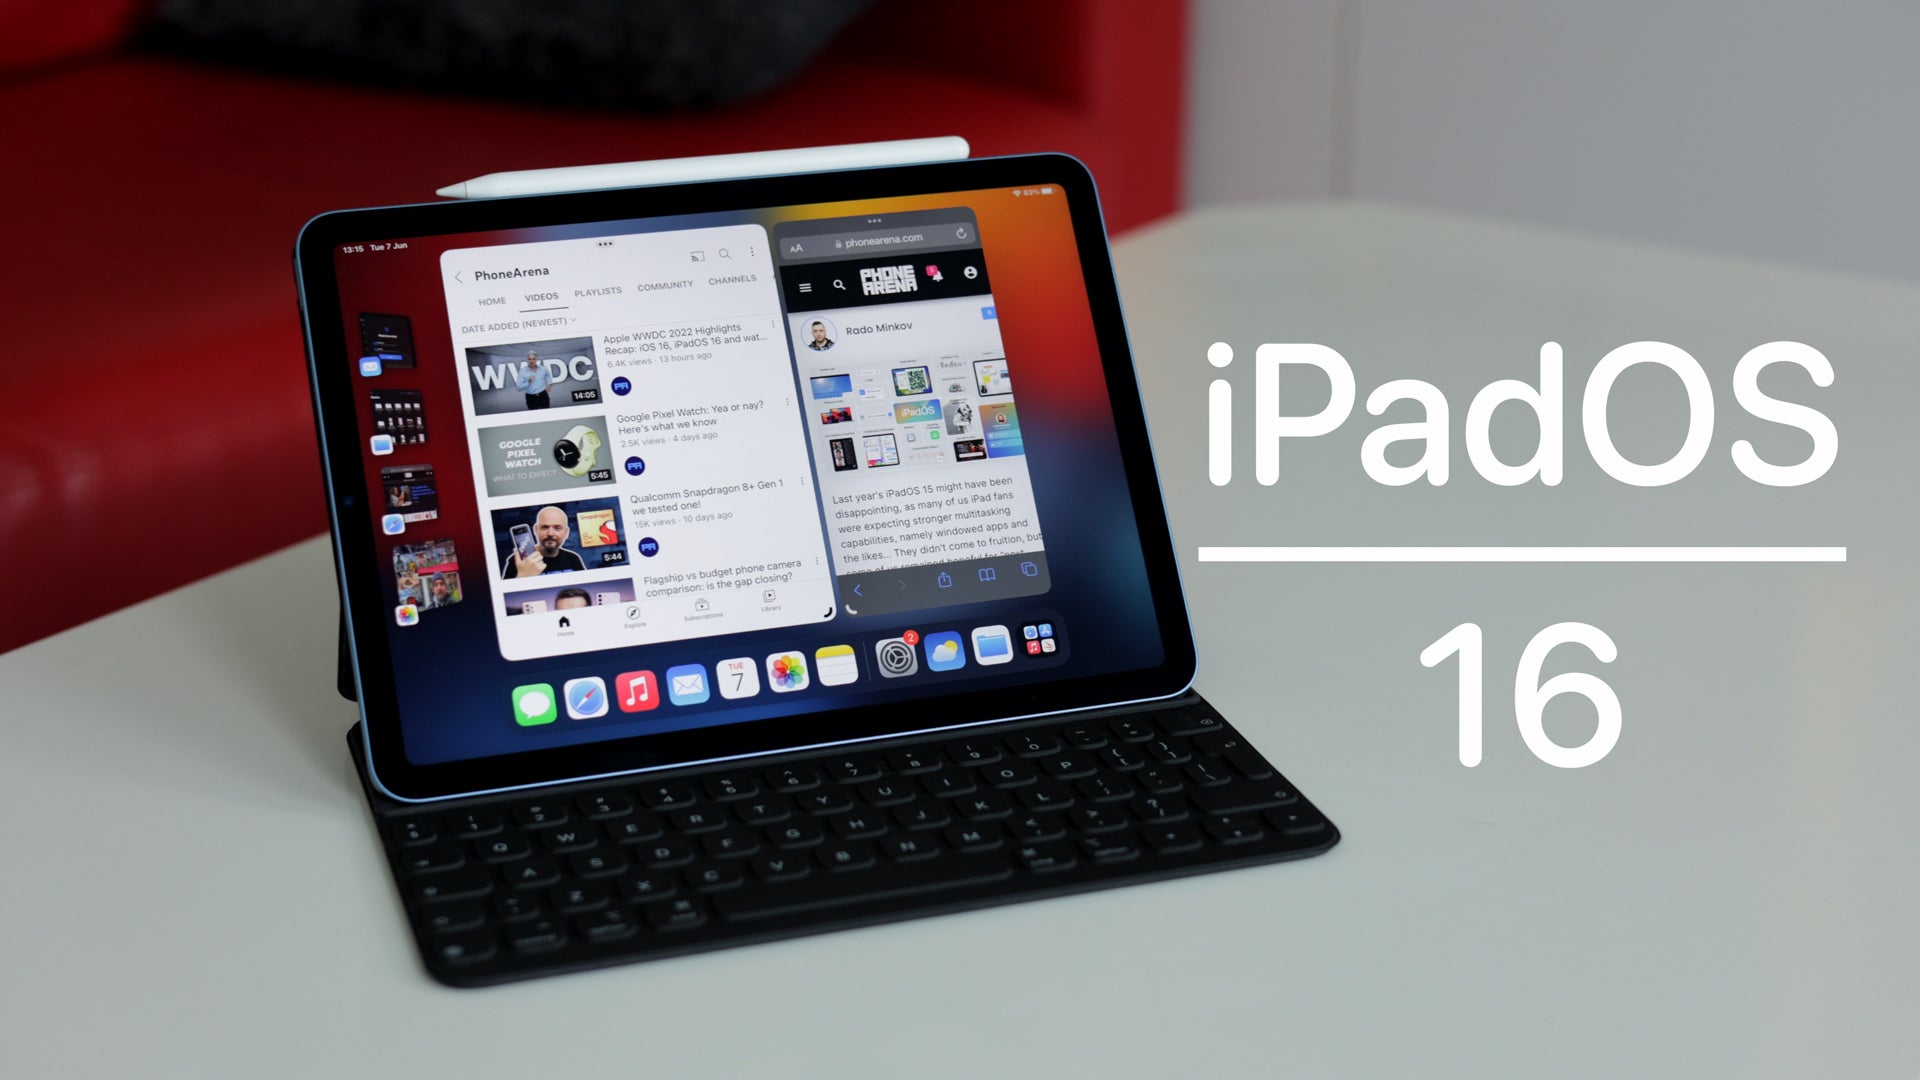 iPadOS 16 beta running on iPad Air 2022, Stage Manager showcases multitasking feature — why Apple's upcoming budget 2022 iPad poses a major threat to Android tablets (and their already small market share).